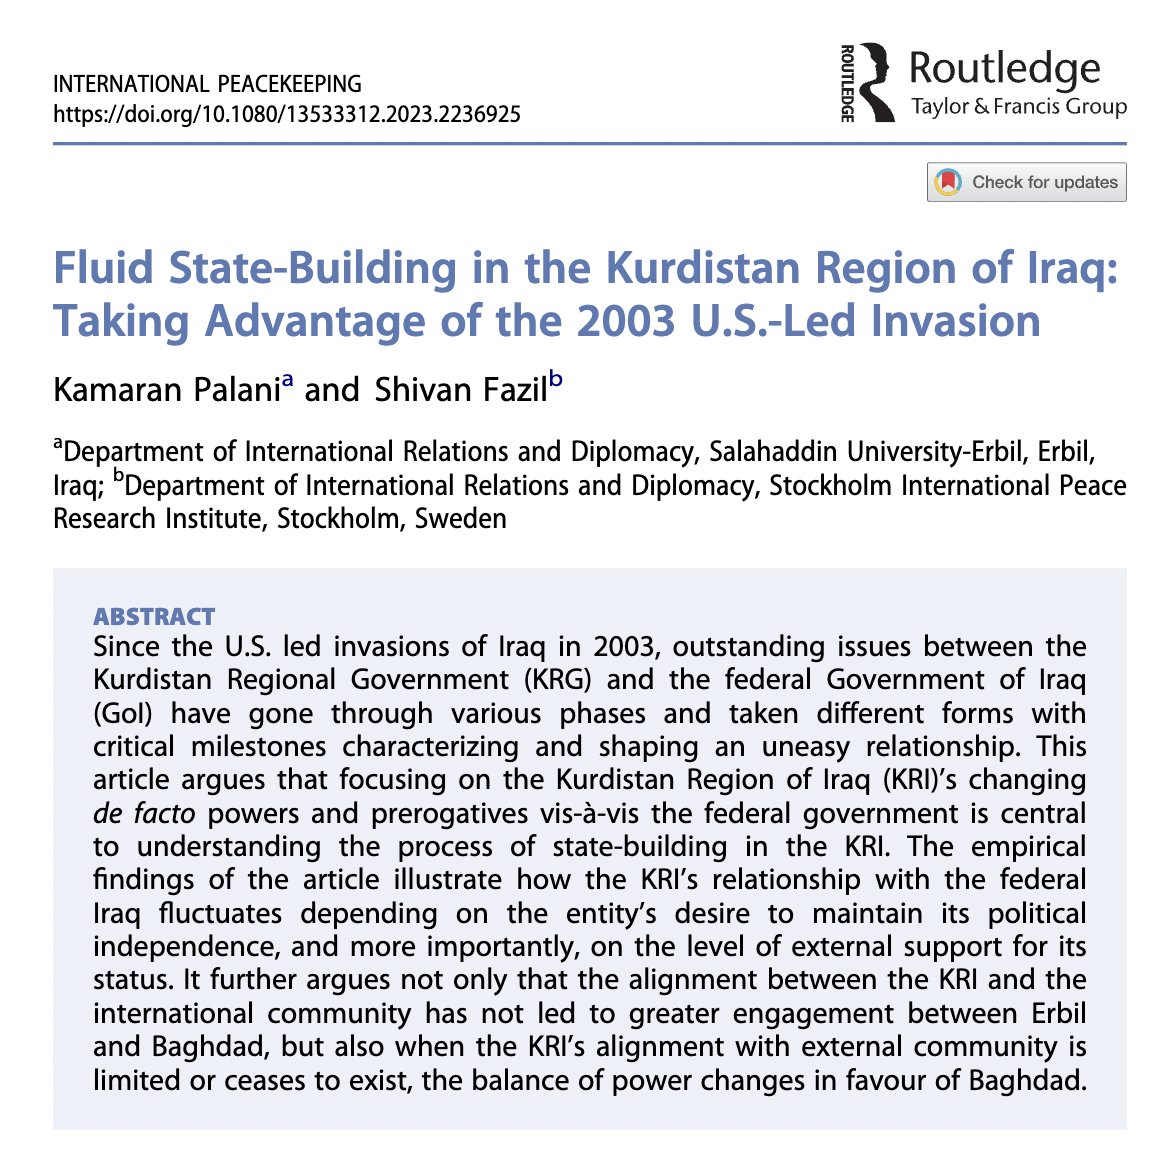 @shamiranmako @IWAN_Iraq @IntPeacekeeping @MarsinRA @HamzehKarkhi @IreneCostantini The next article published in the special issue we are editing on 20 years since the US invasion of #Iraq is from our longtime collaborators @KamaranMPalani and @ShivanFazil. It examines Baghdad/Erbil relations over the 20 years since the US invasion. ➡️rb.gy/adxms